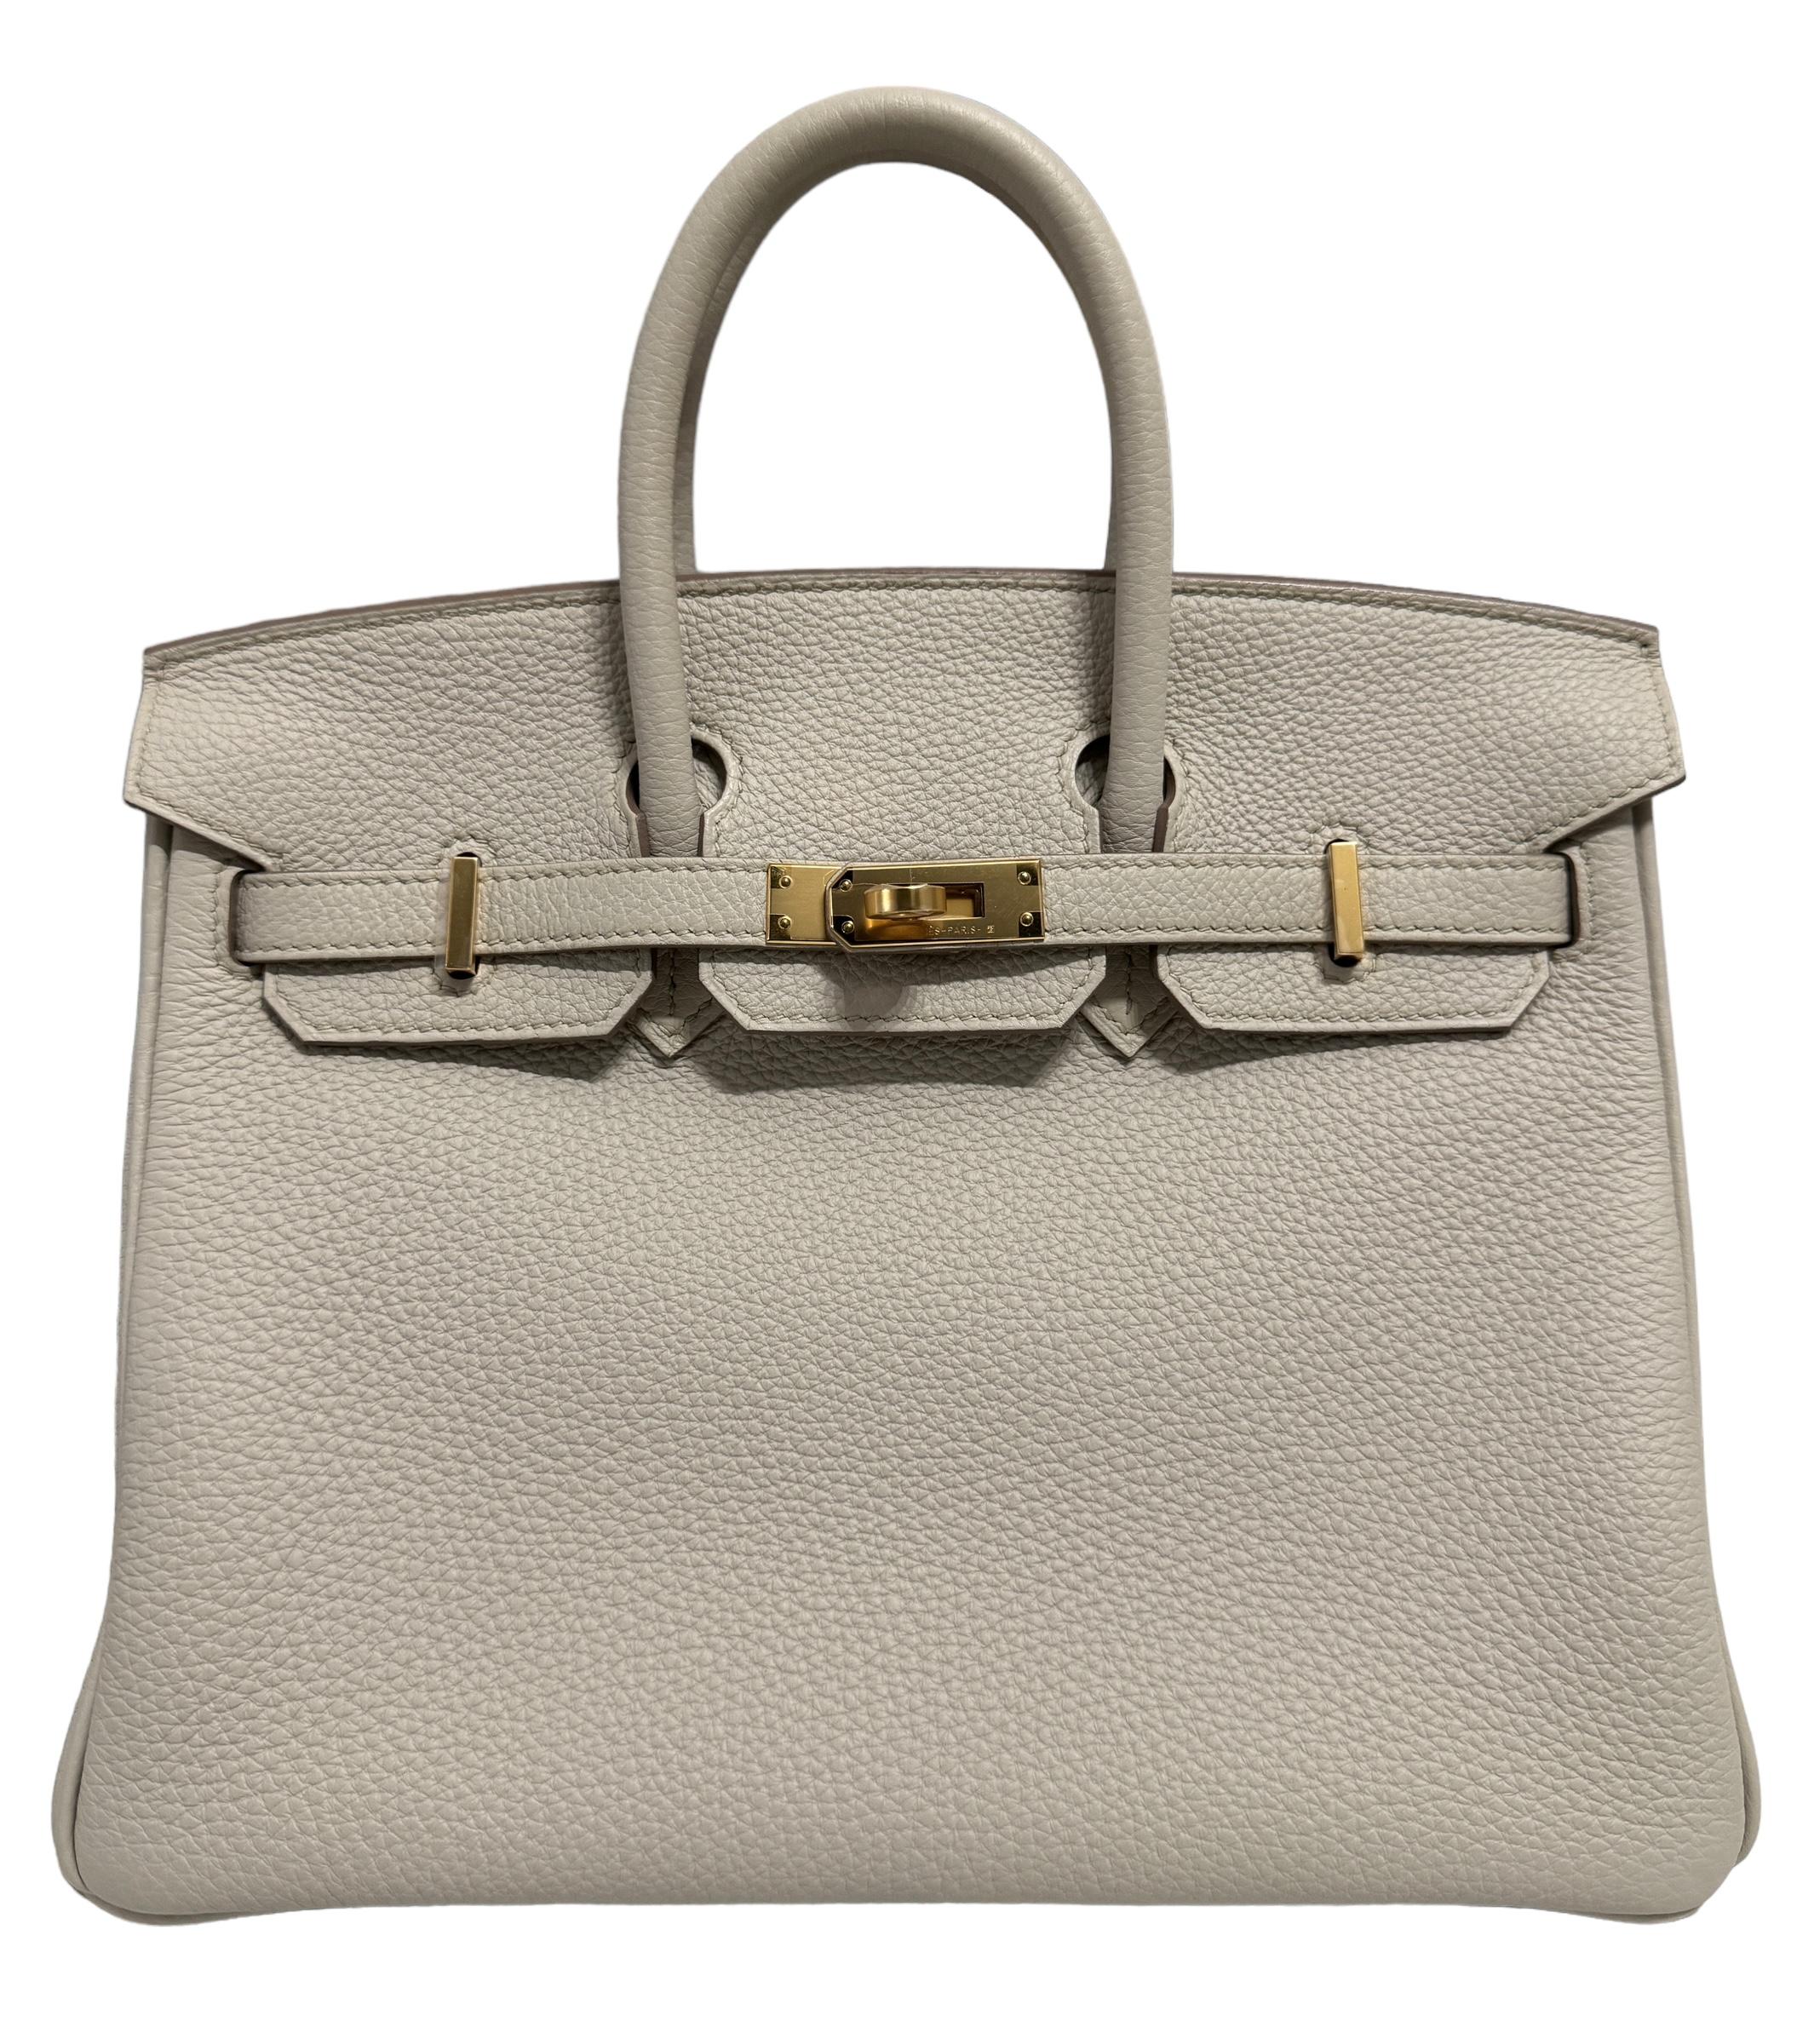 Absolutely Stunning and One The Most Coveted and Difficult to get Hermes Combos! As New Hermes Birkin 25 Beton Togo Leather complimented by Gold Hardware. U Stamp 2022. 

Shop With Confidence from Lux Addicts. Authenticity Guaranteed! 
